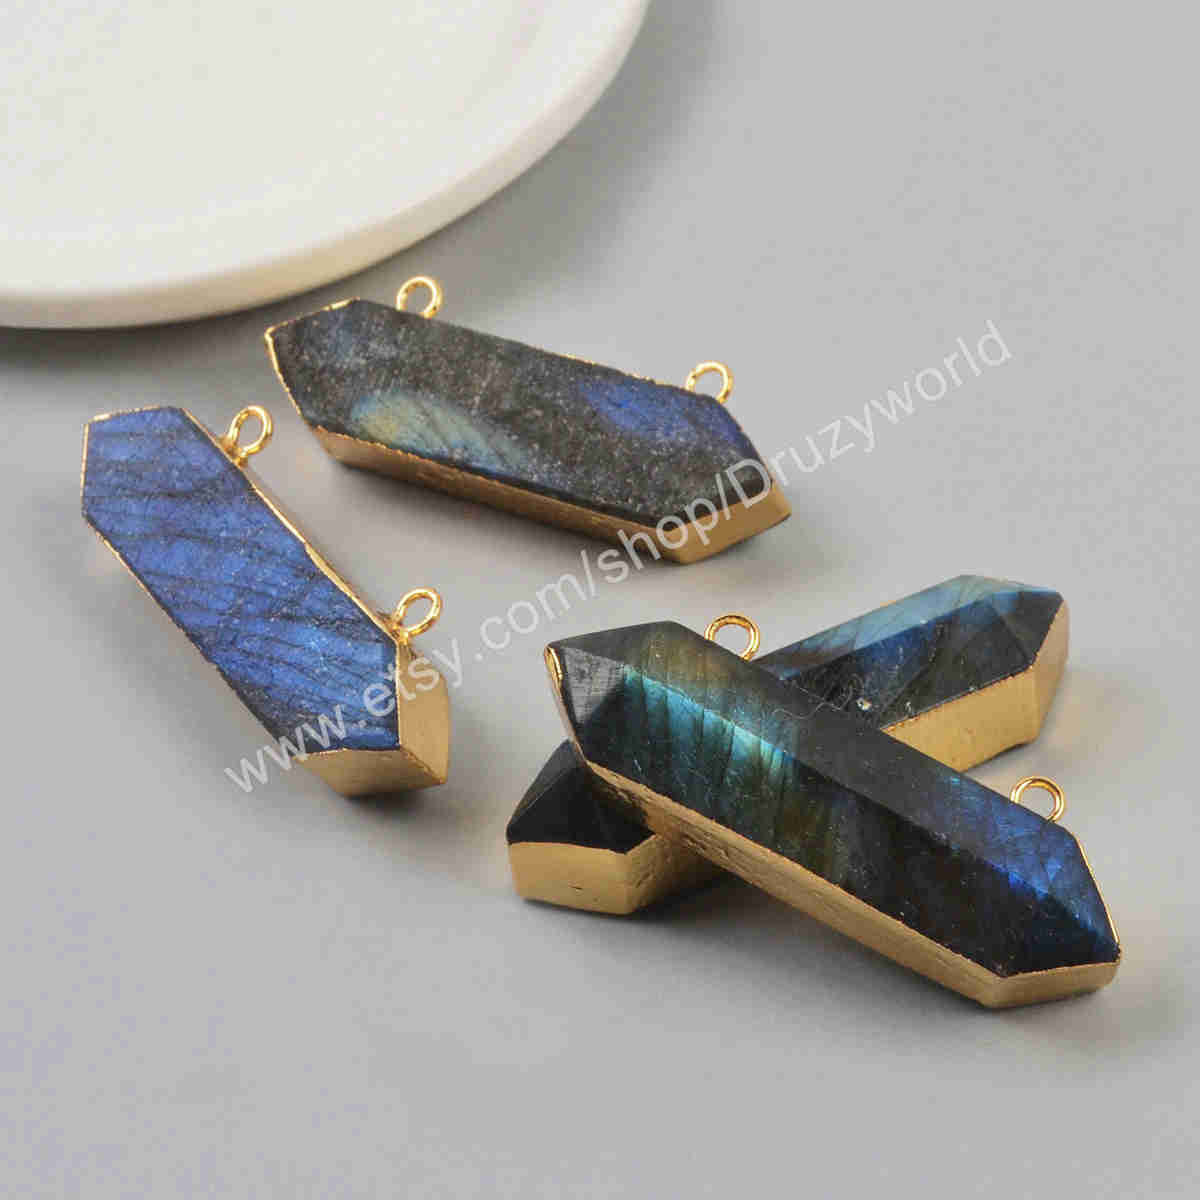 Hexagon Labradorite Connector Faceted Gemstone Terminated Point Labradorite Charm Making Jewelry Crystal Stone Craft 